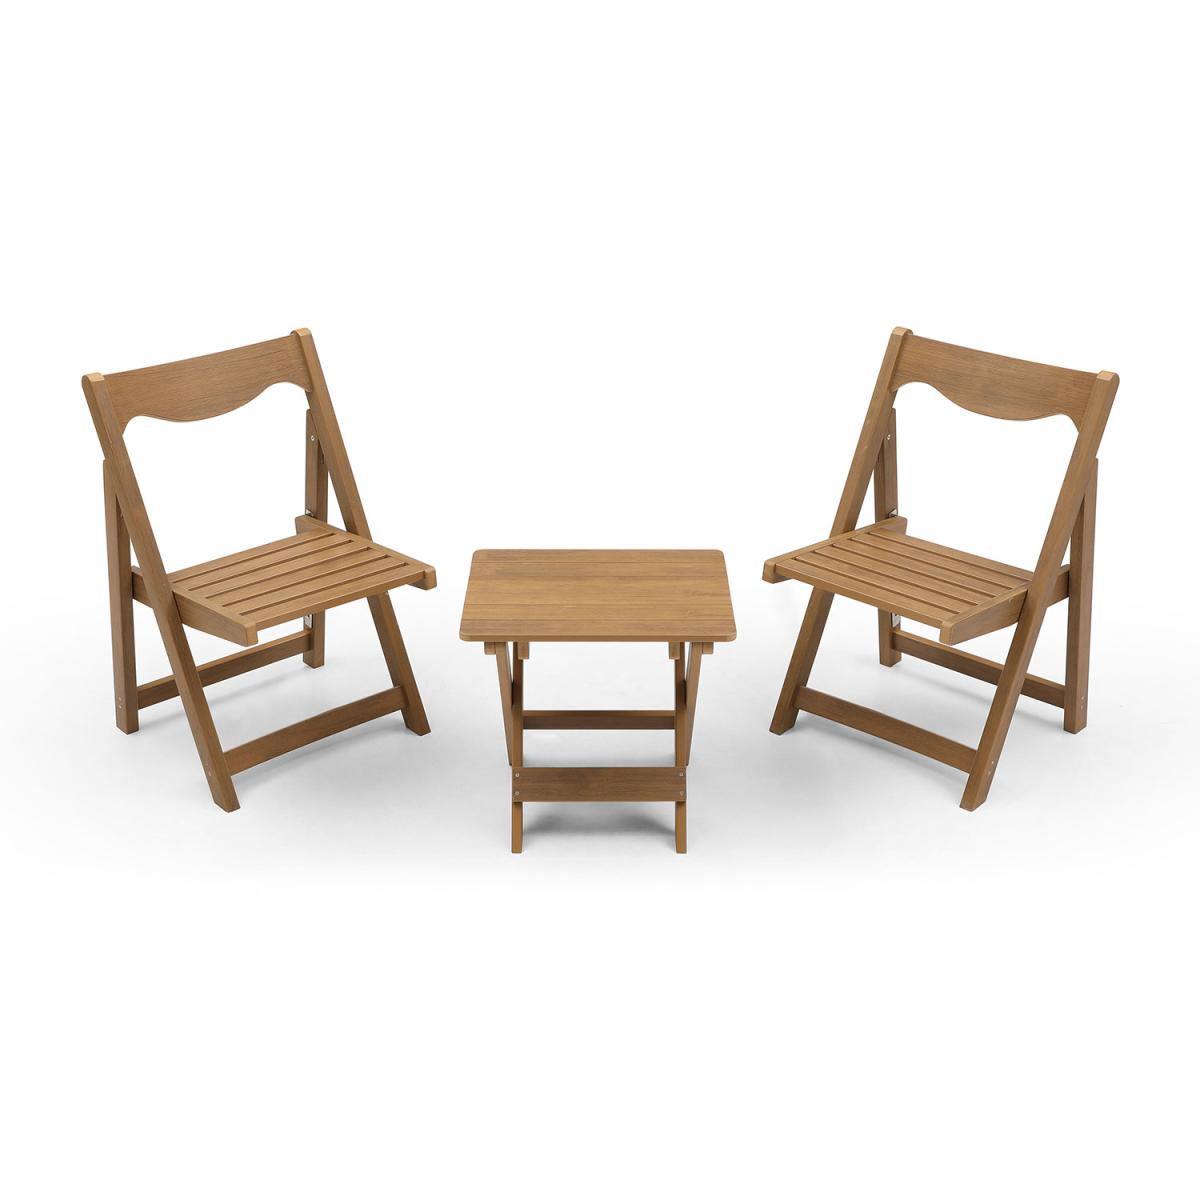 HIPS Material Outdoor Bistro Set Foldable Small Table and Chair Set with 2 Chairs and Rectangular Table, Teak